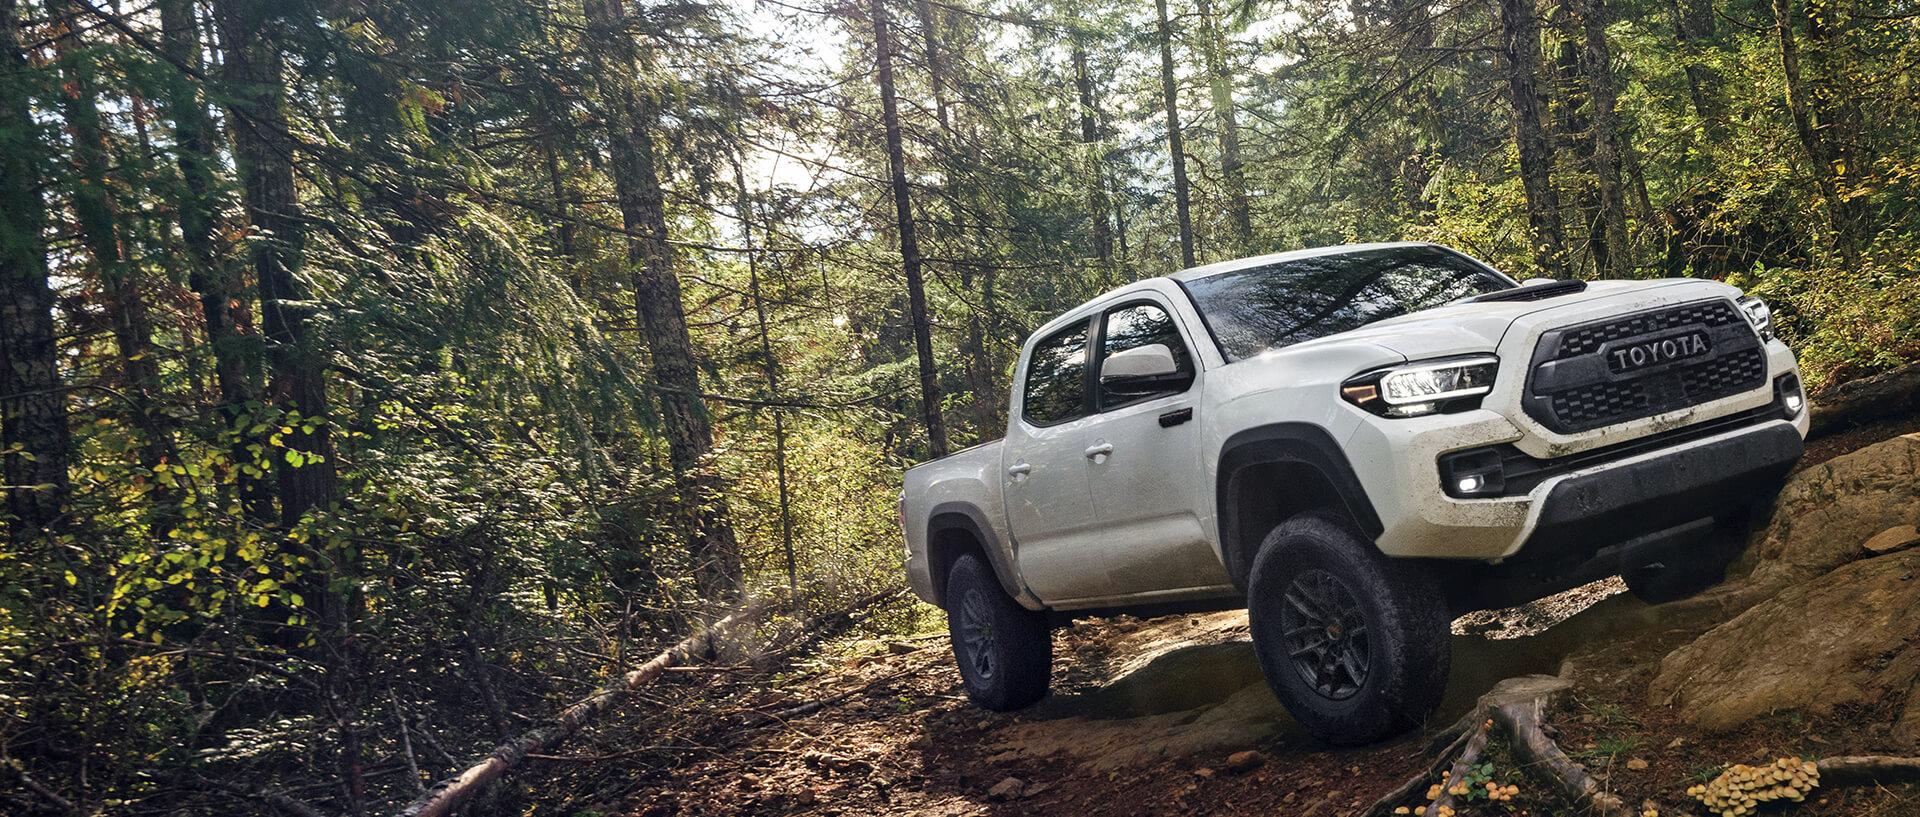 Toyota truck climbing mountain with lots of trees around